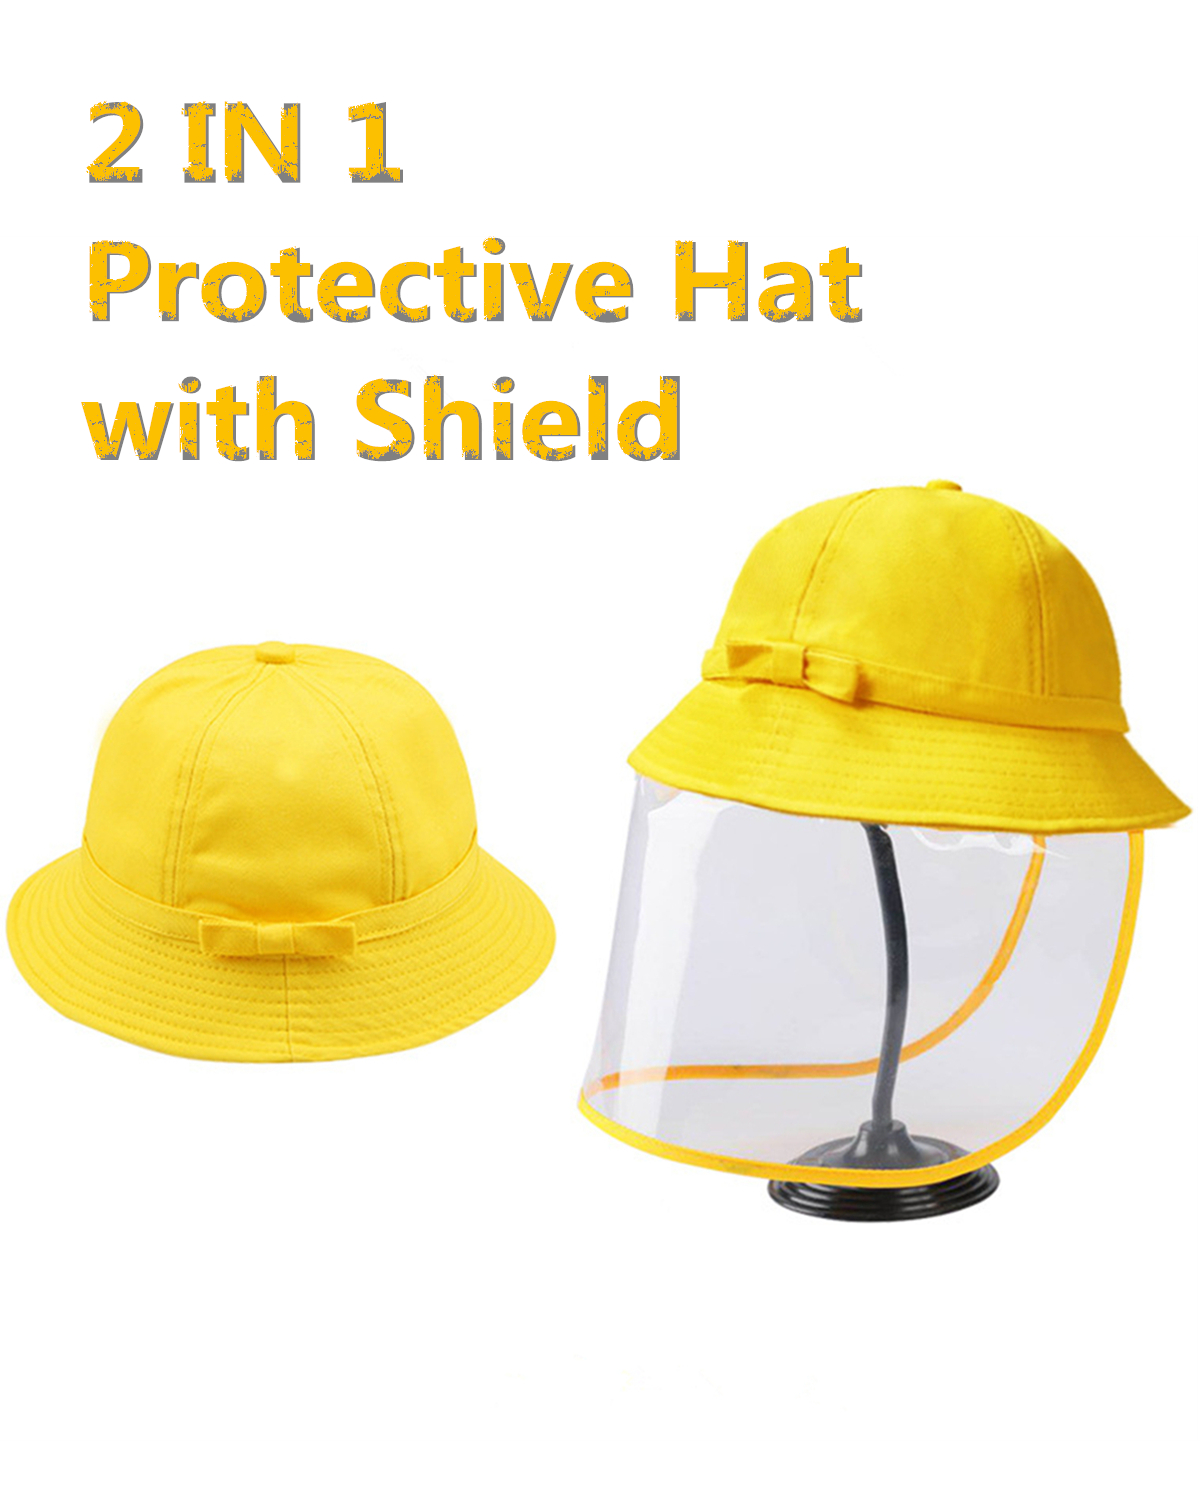 PODOM-Kids-Bucket-Hat-Protection-Safety-Removable-Full-Face-Shield-Protective-Cover-Sun-Fisherman-Ha-1676649-1